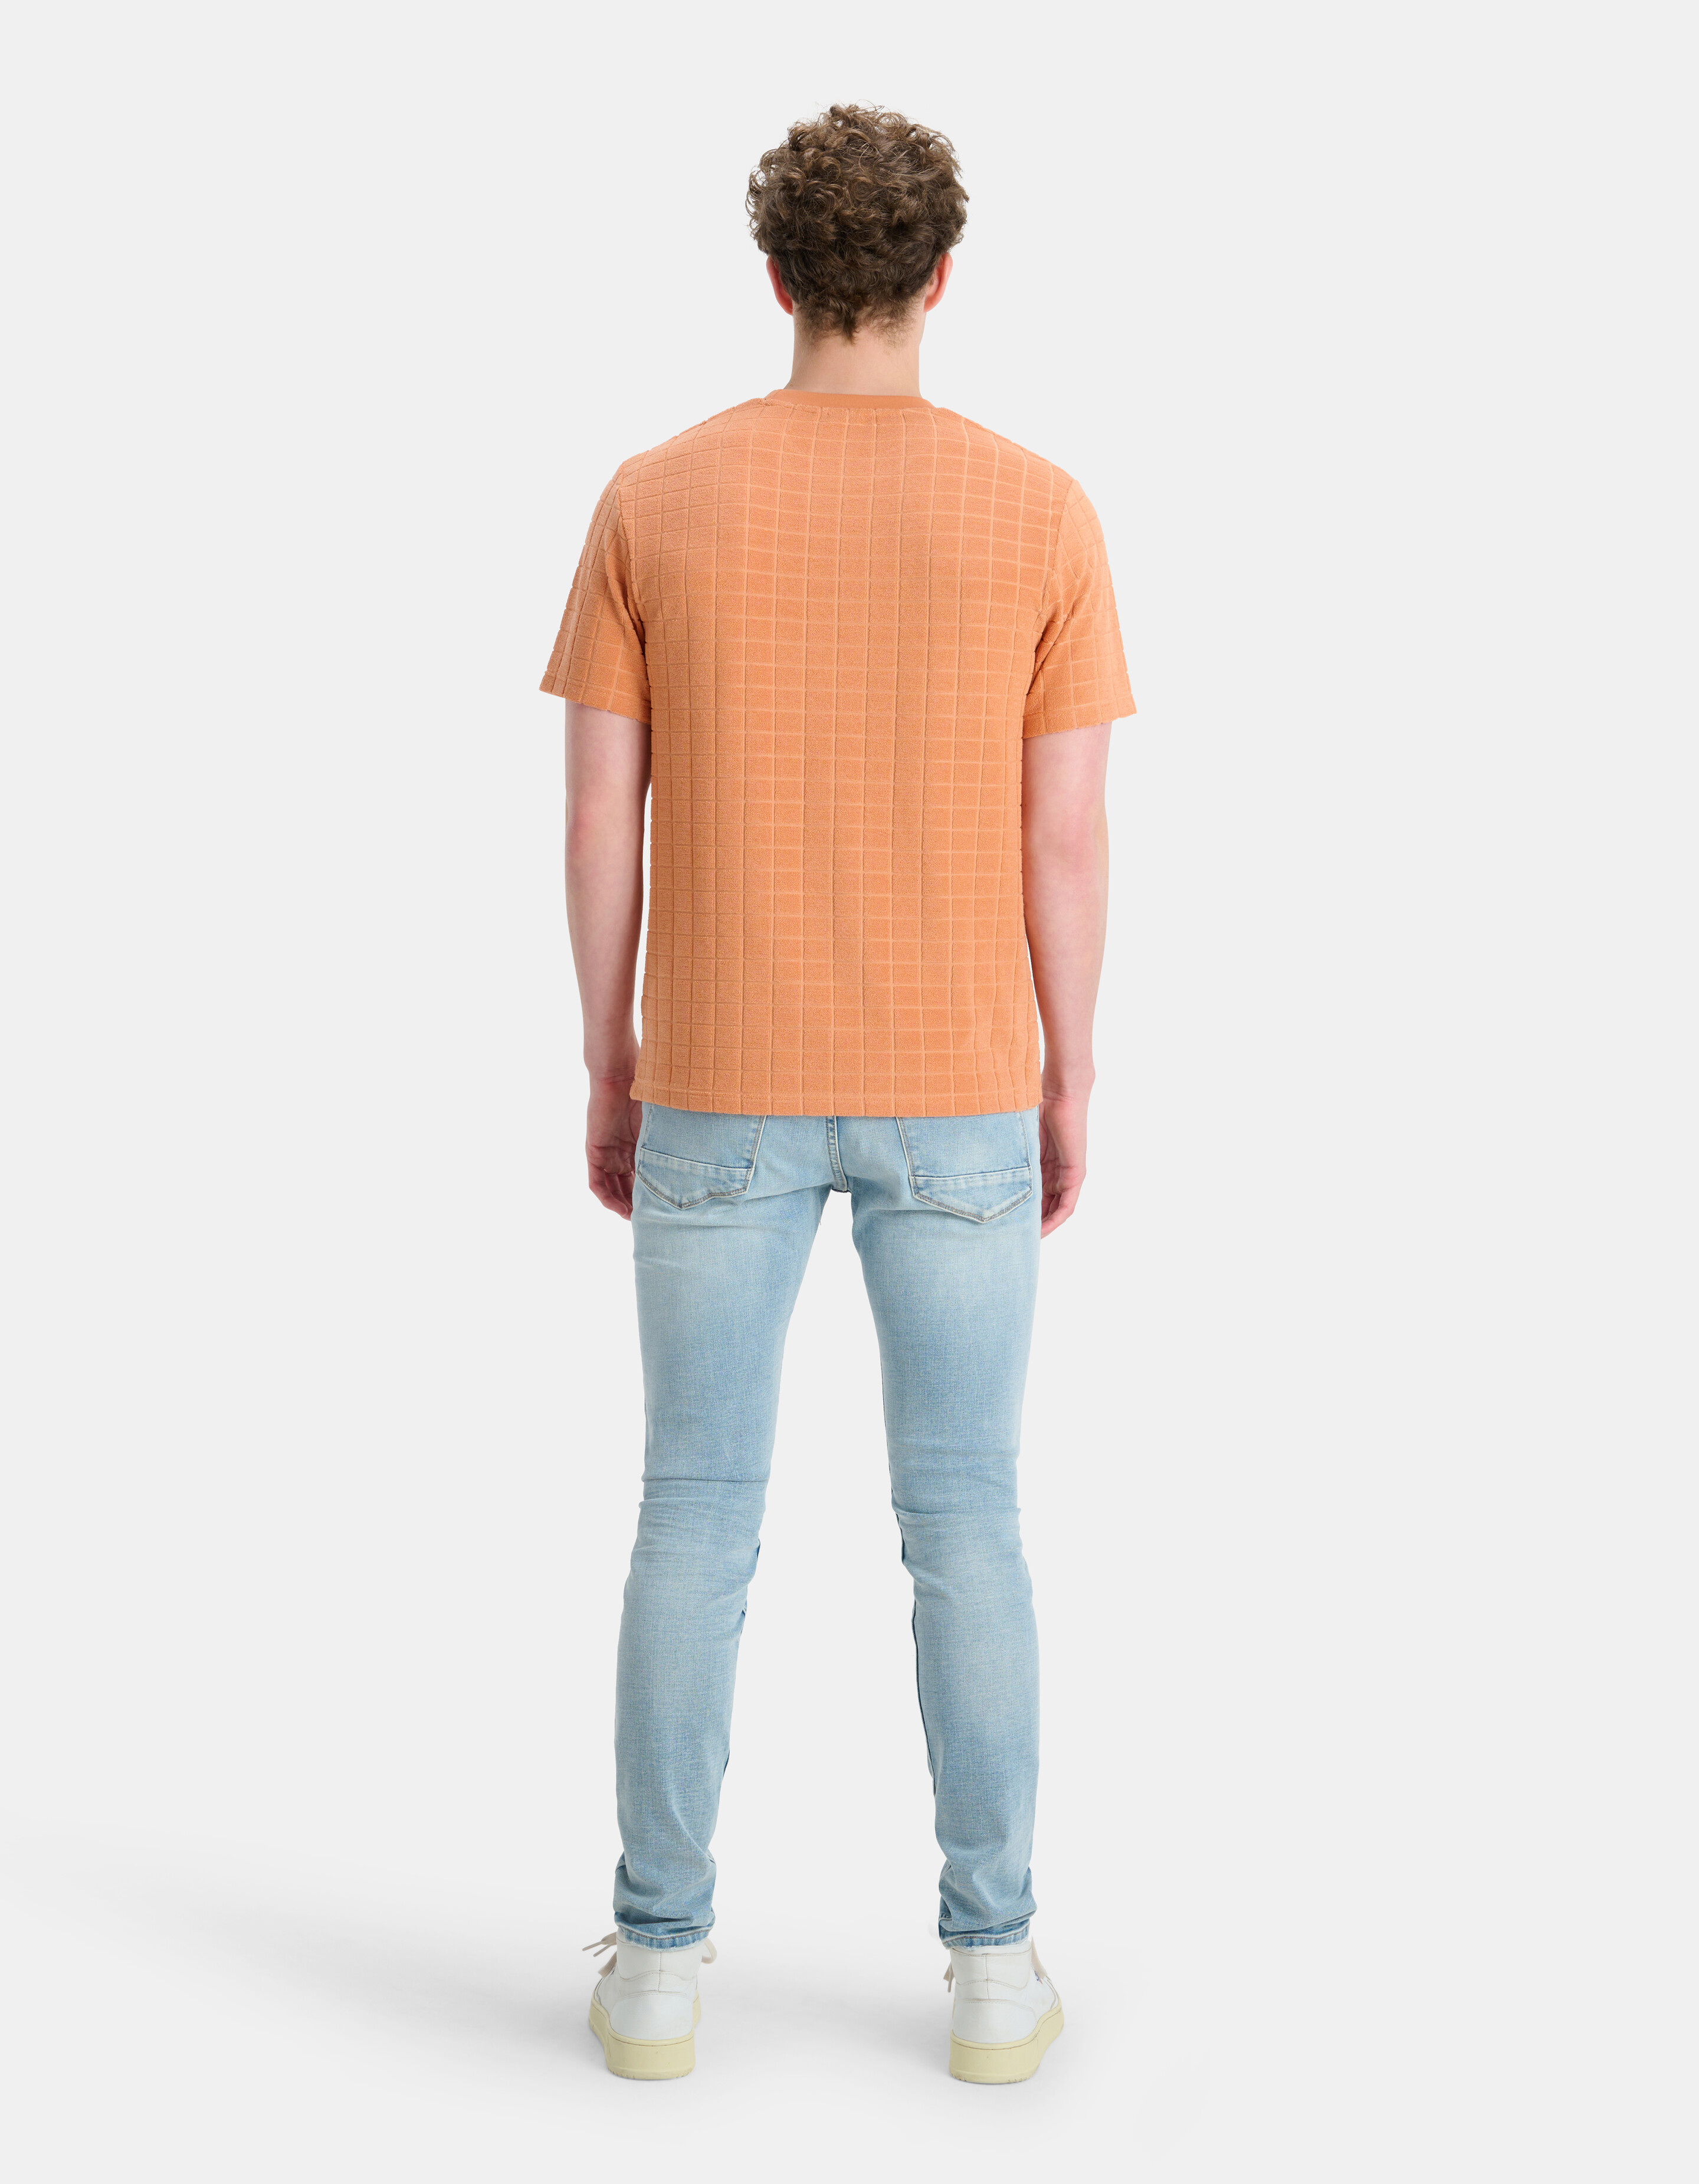 Square Towelling T-shirt REFILL